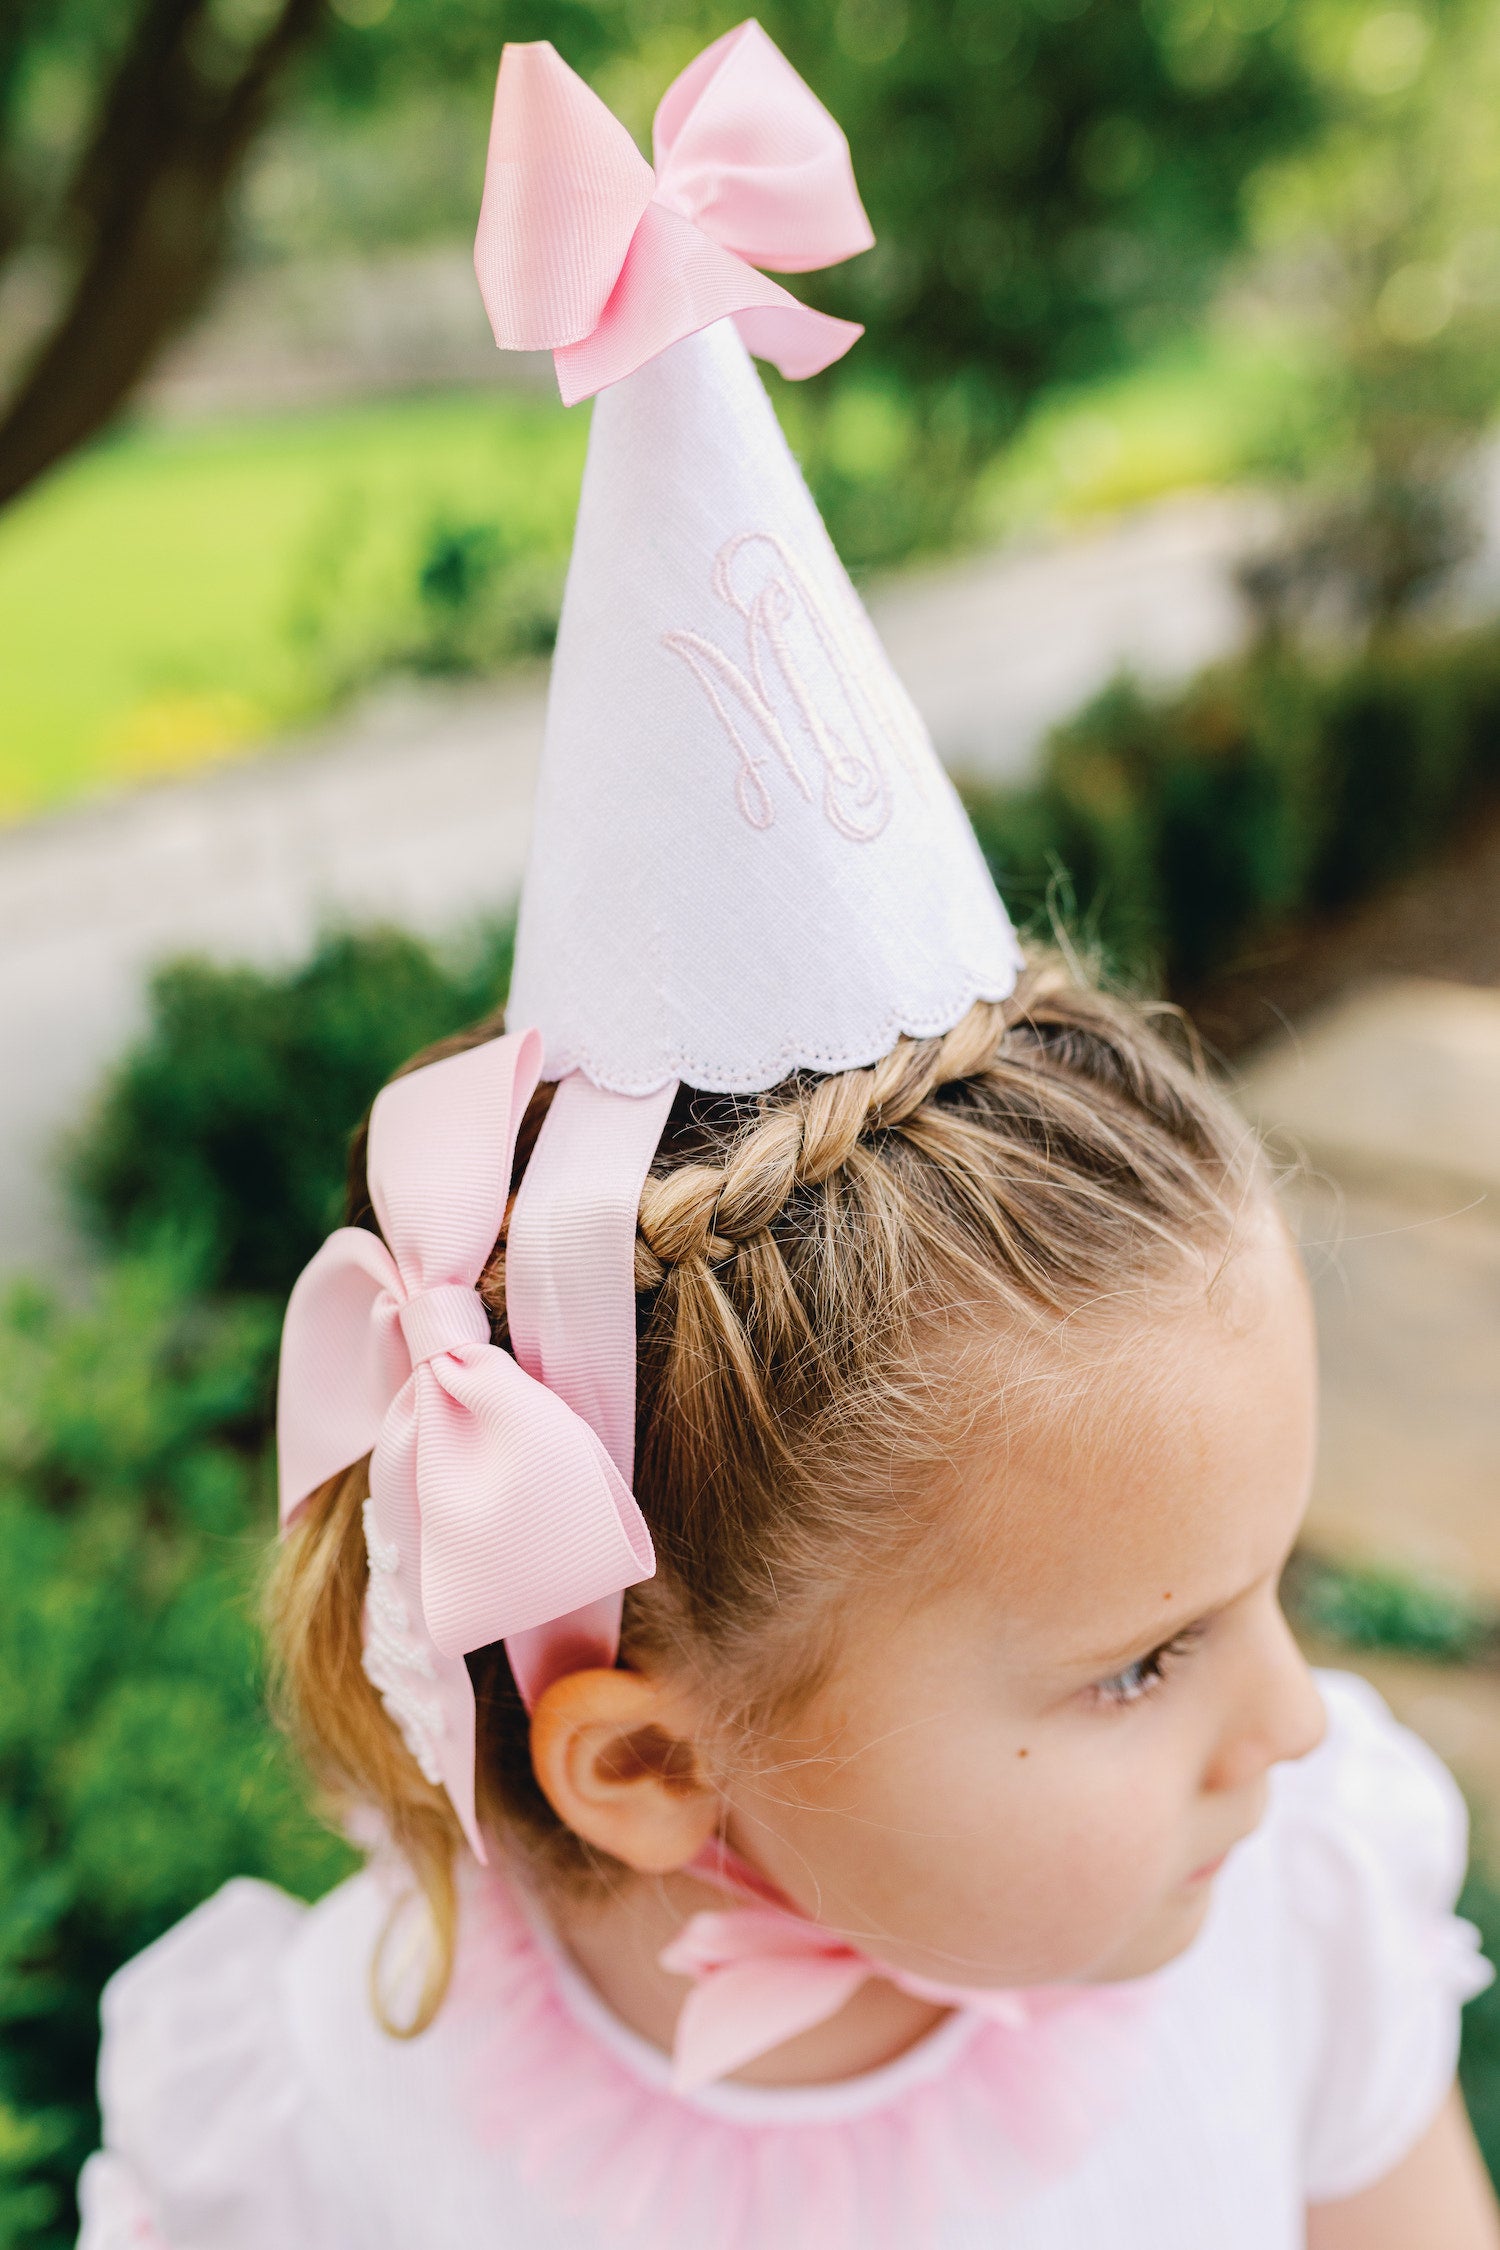 Monogrammed pink bow party hat Charlotte sy Dimby pink bow pearl party dress and inspiration for children little princess